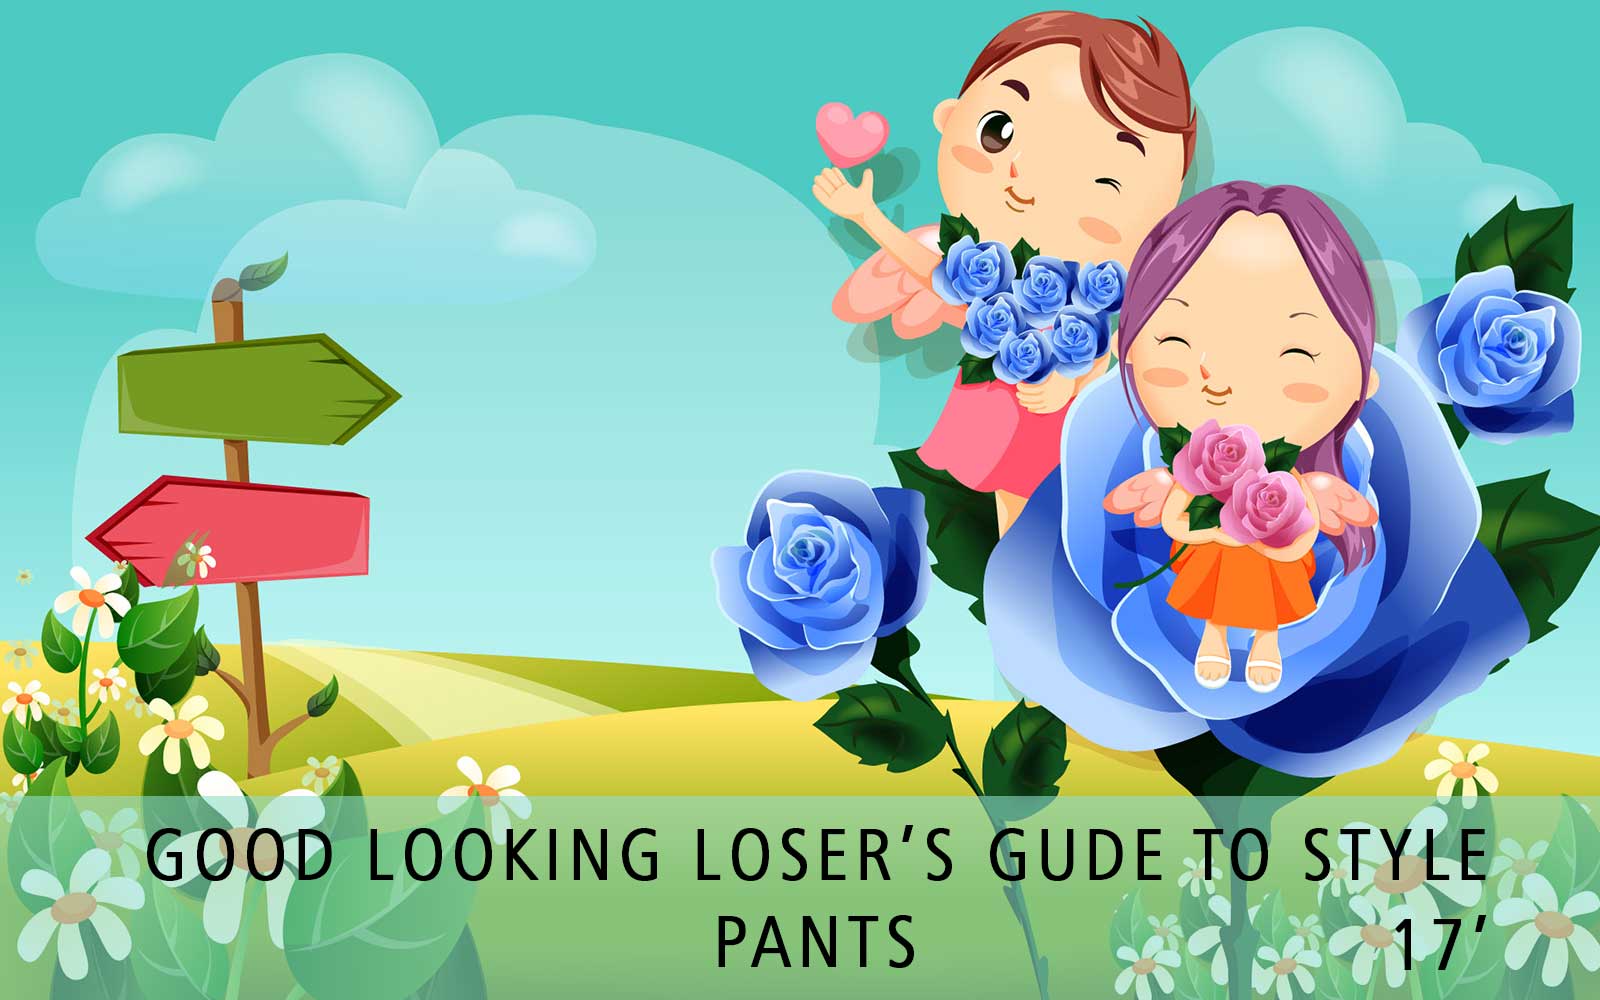 Good Looking Loser's Summer 2017 Guide to Style (Pants)